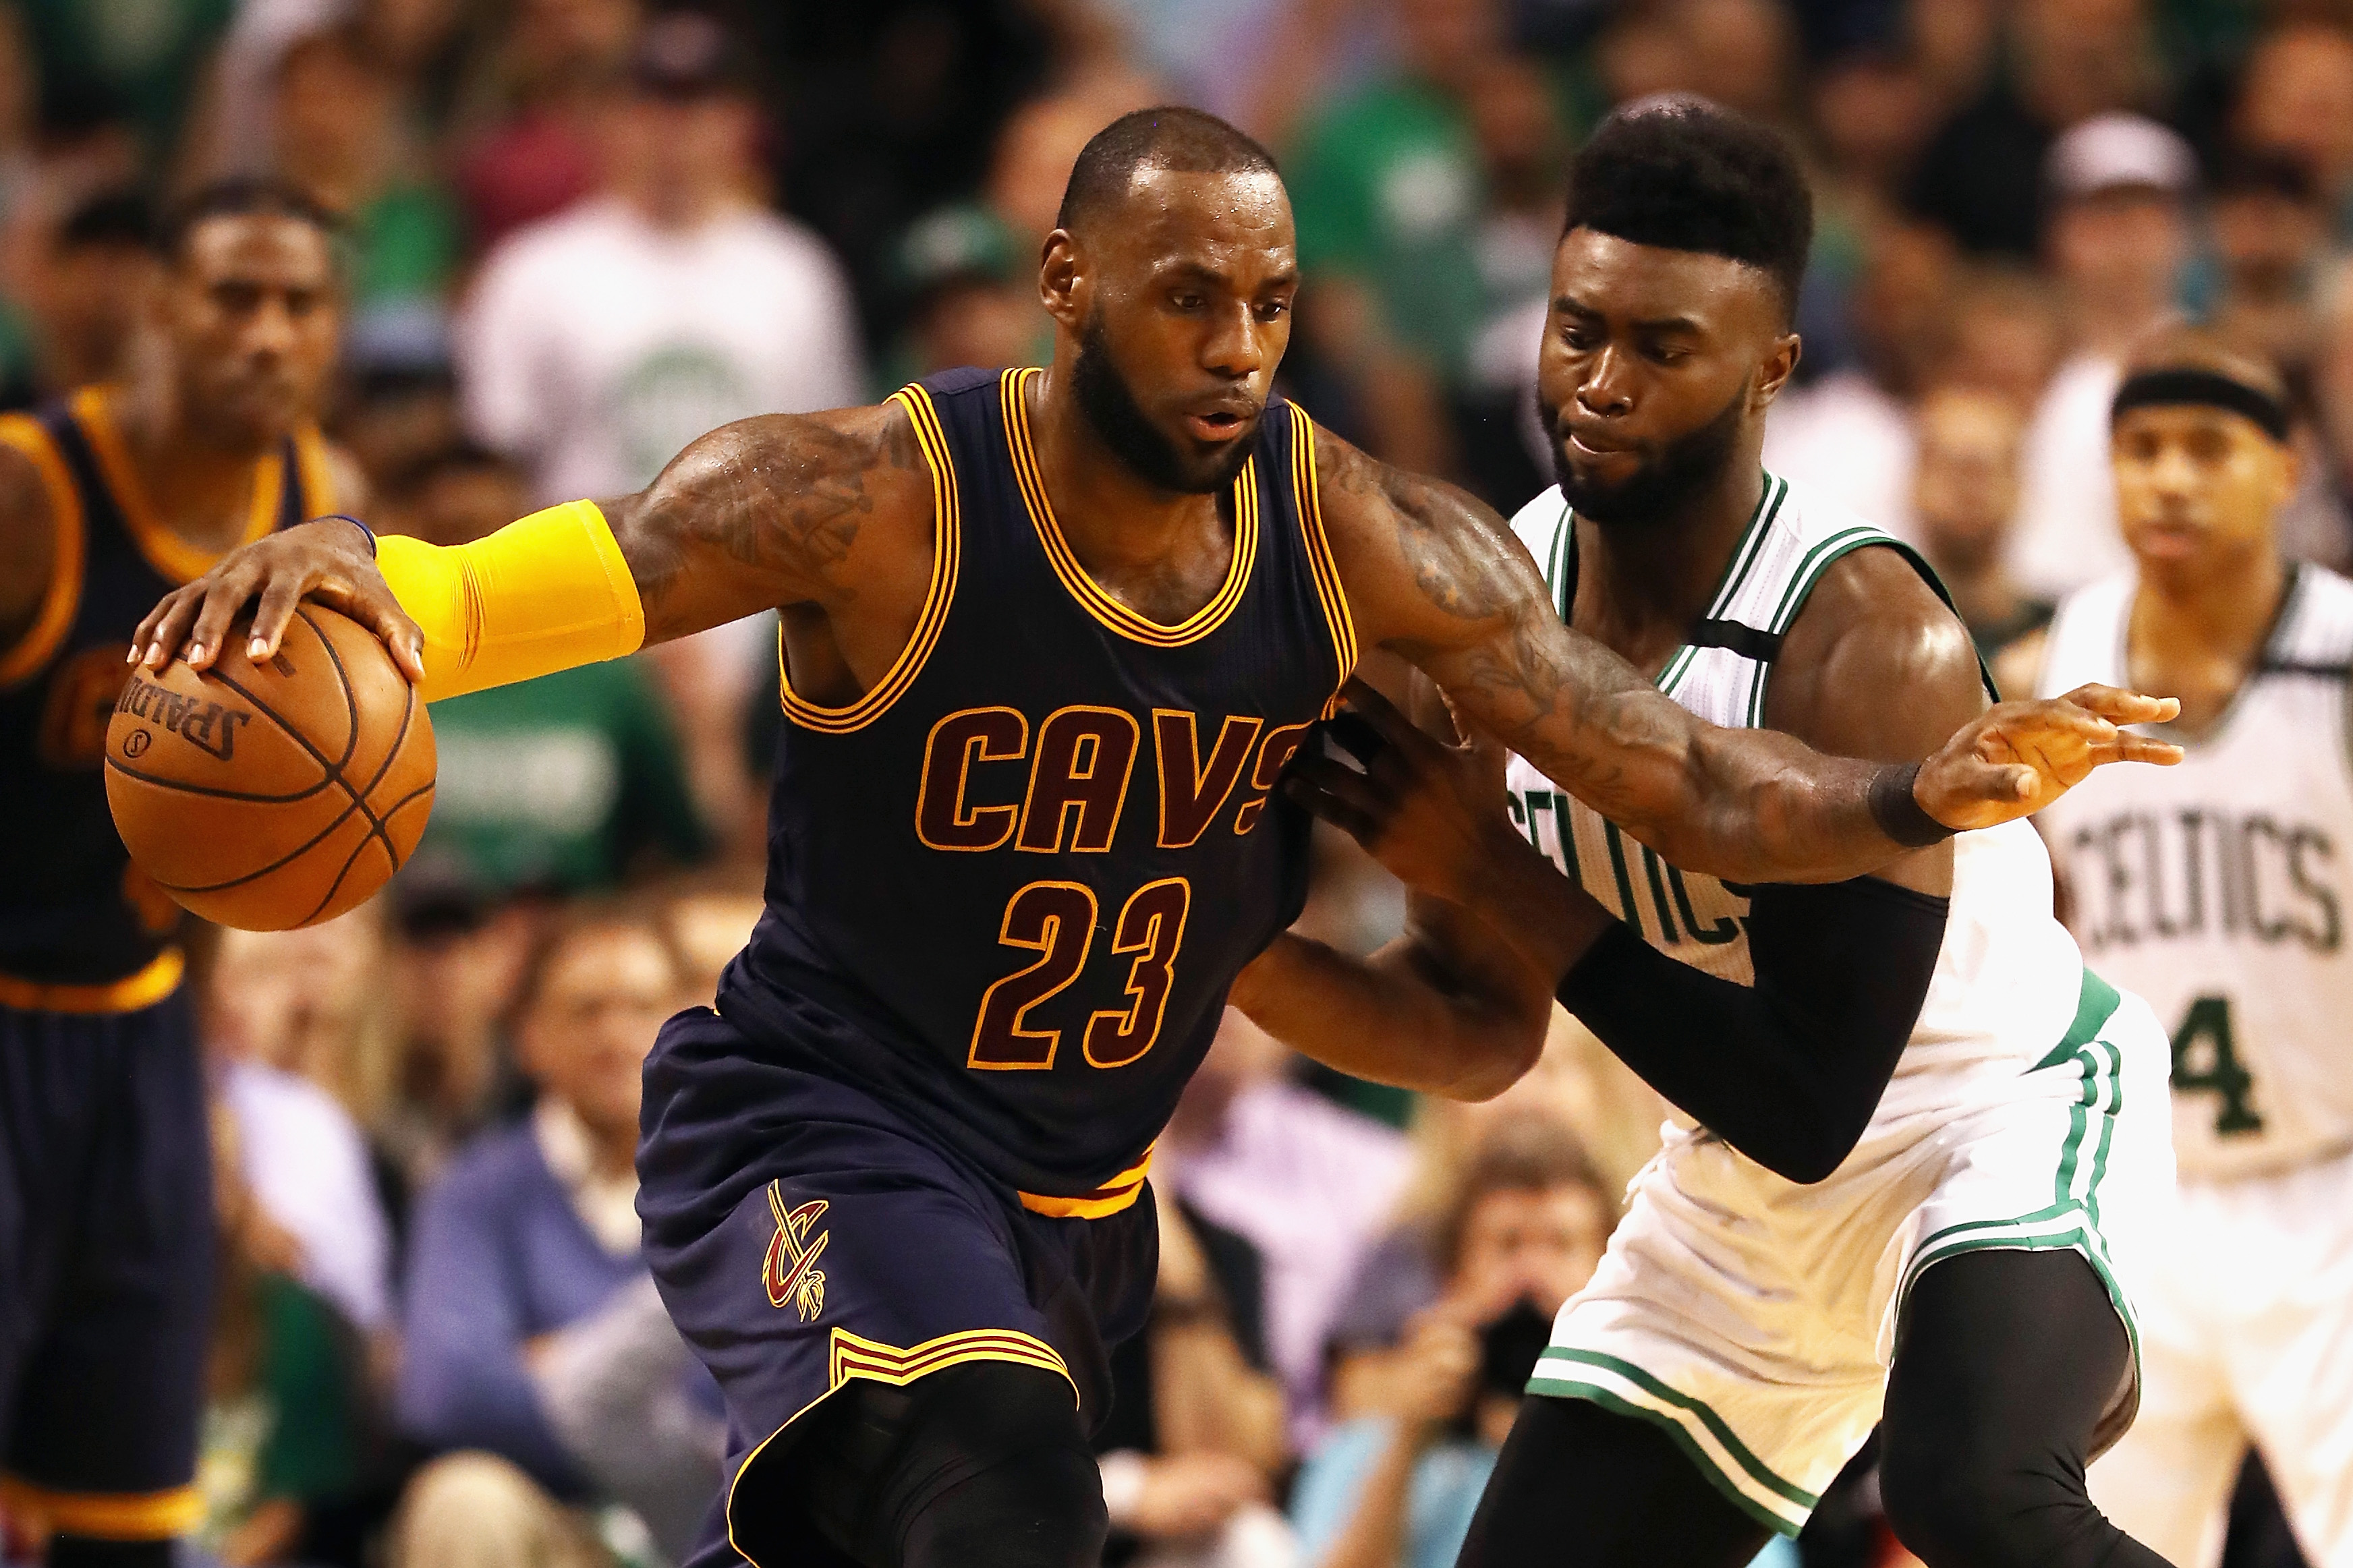 Cavs vs. Celtics Game 2 Live Stream How to Watch Online Without Cable